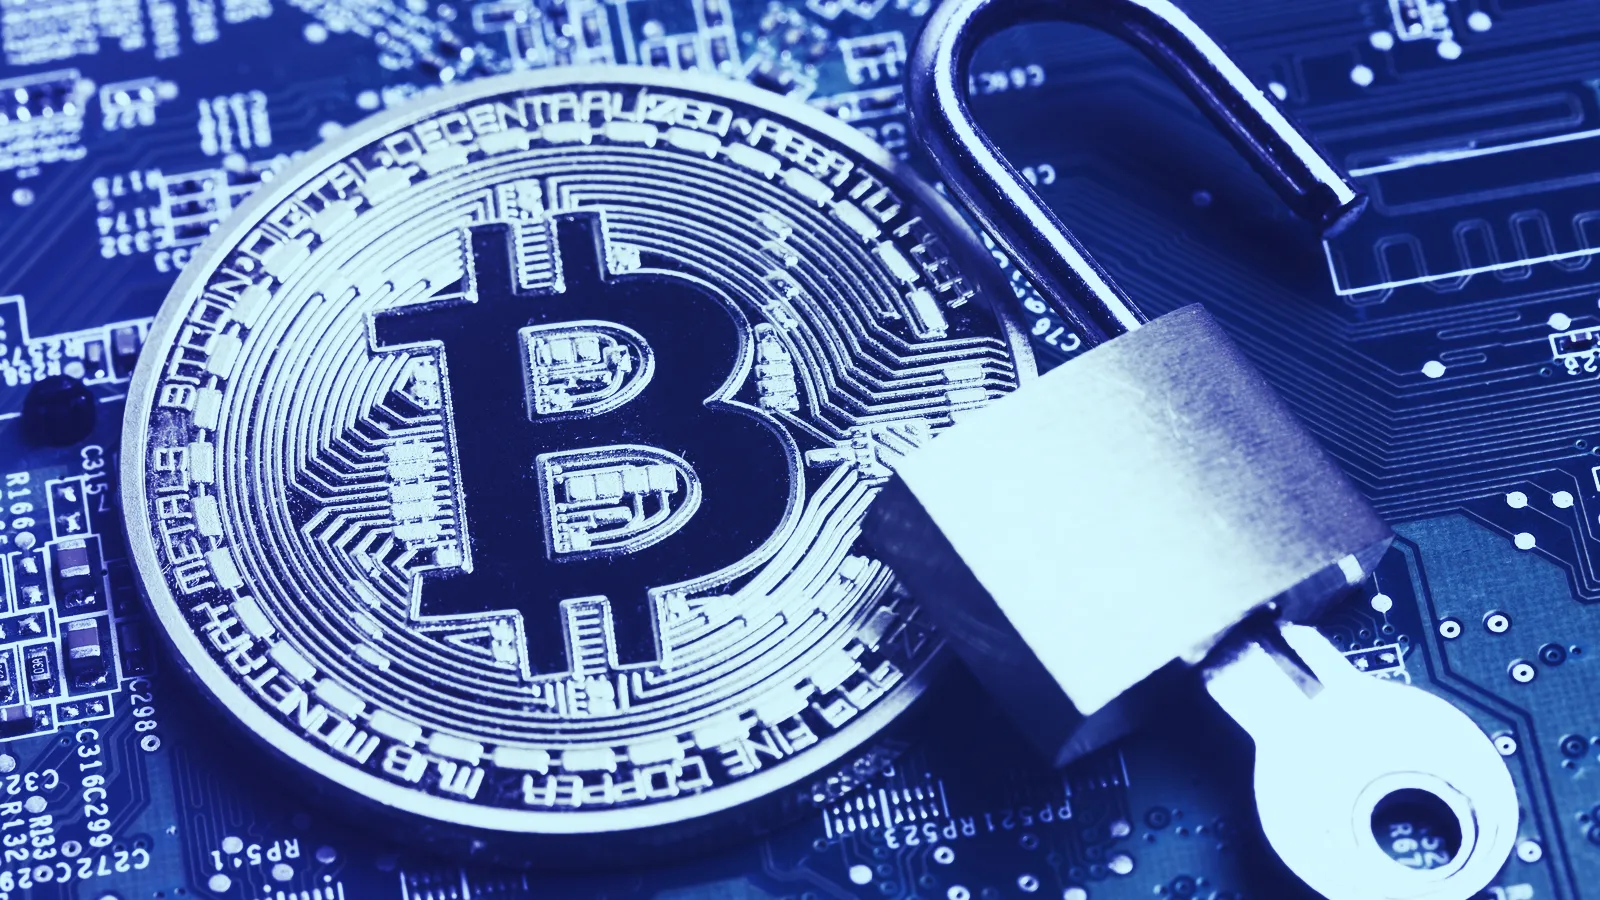 Co-founder of Casa explains how to keep Bitcoin keys safe. Image: Shutterstock